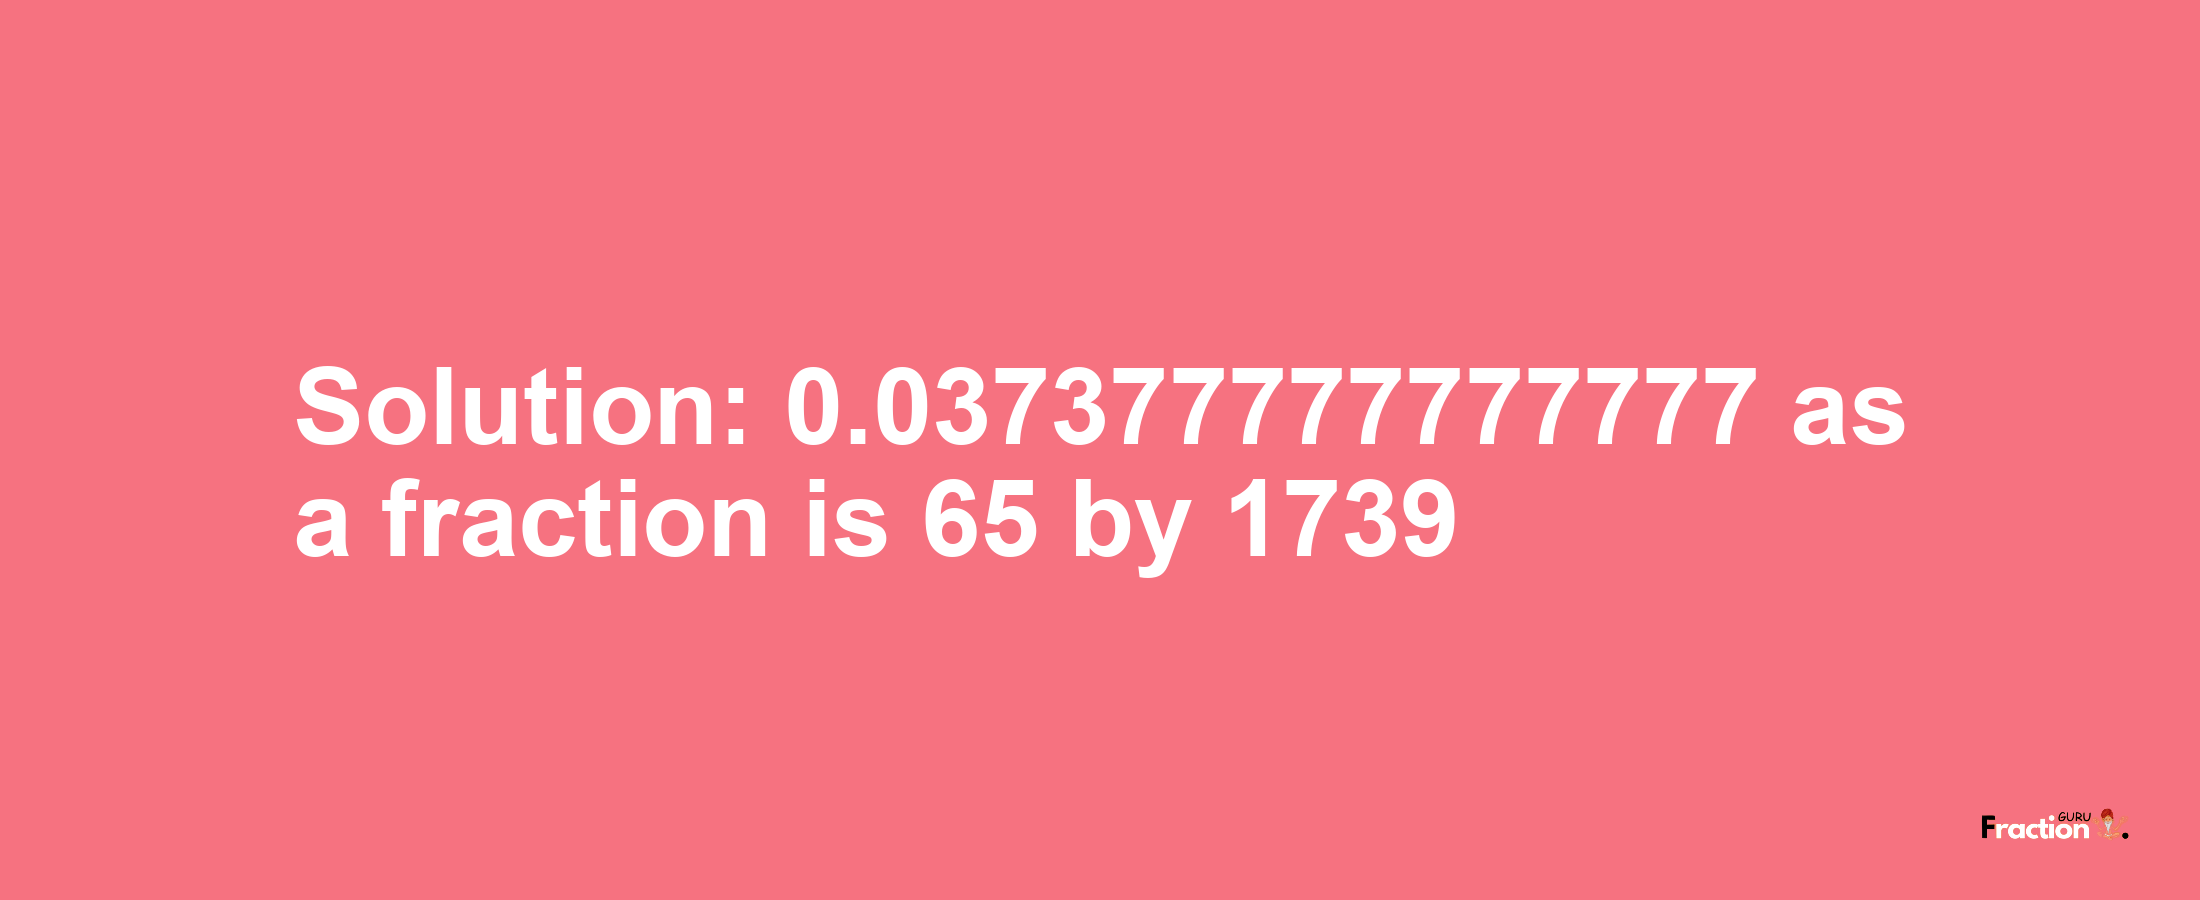 Solution:0.037377777777777 as a fraction is 65/1739